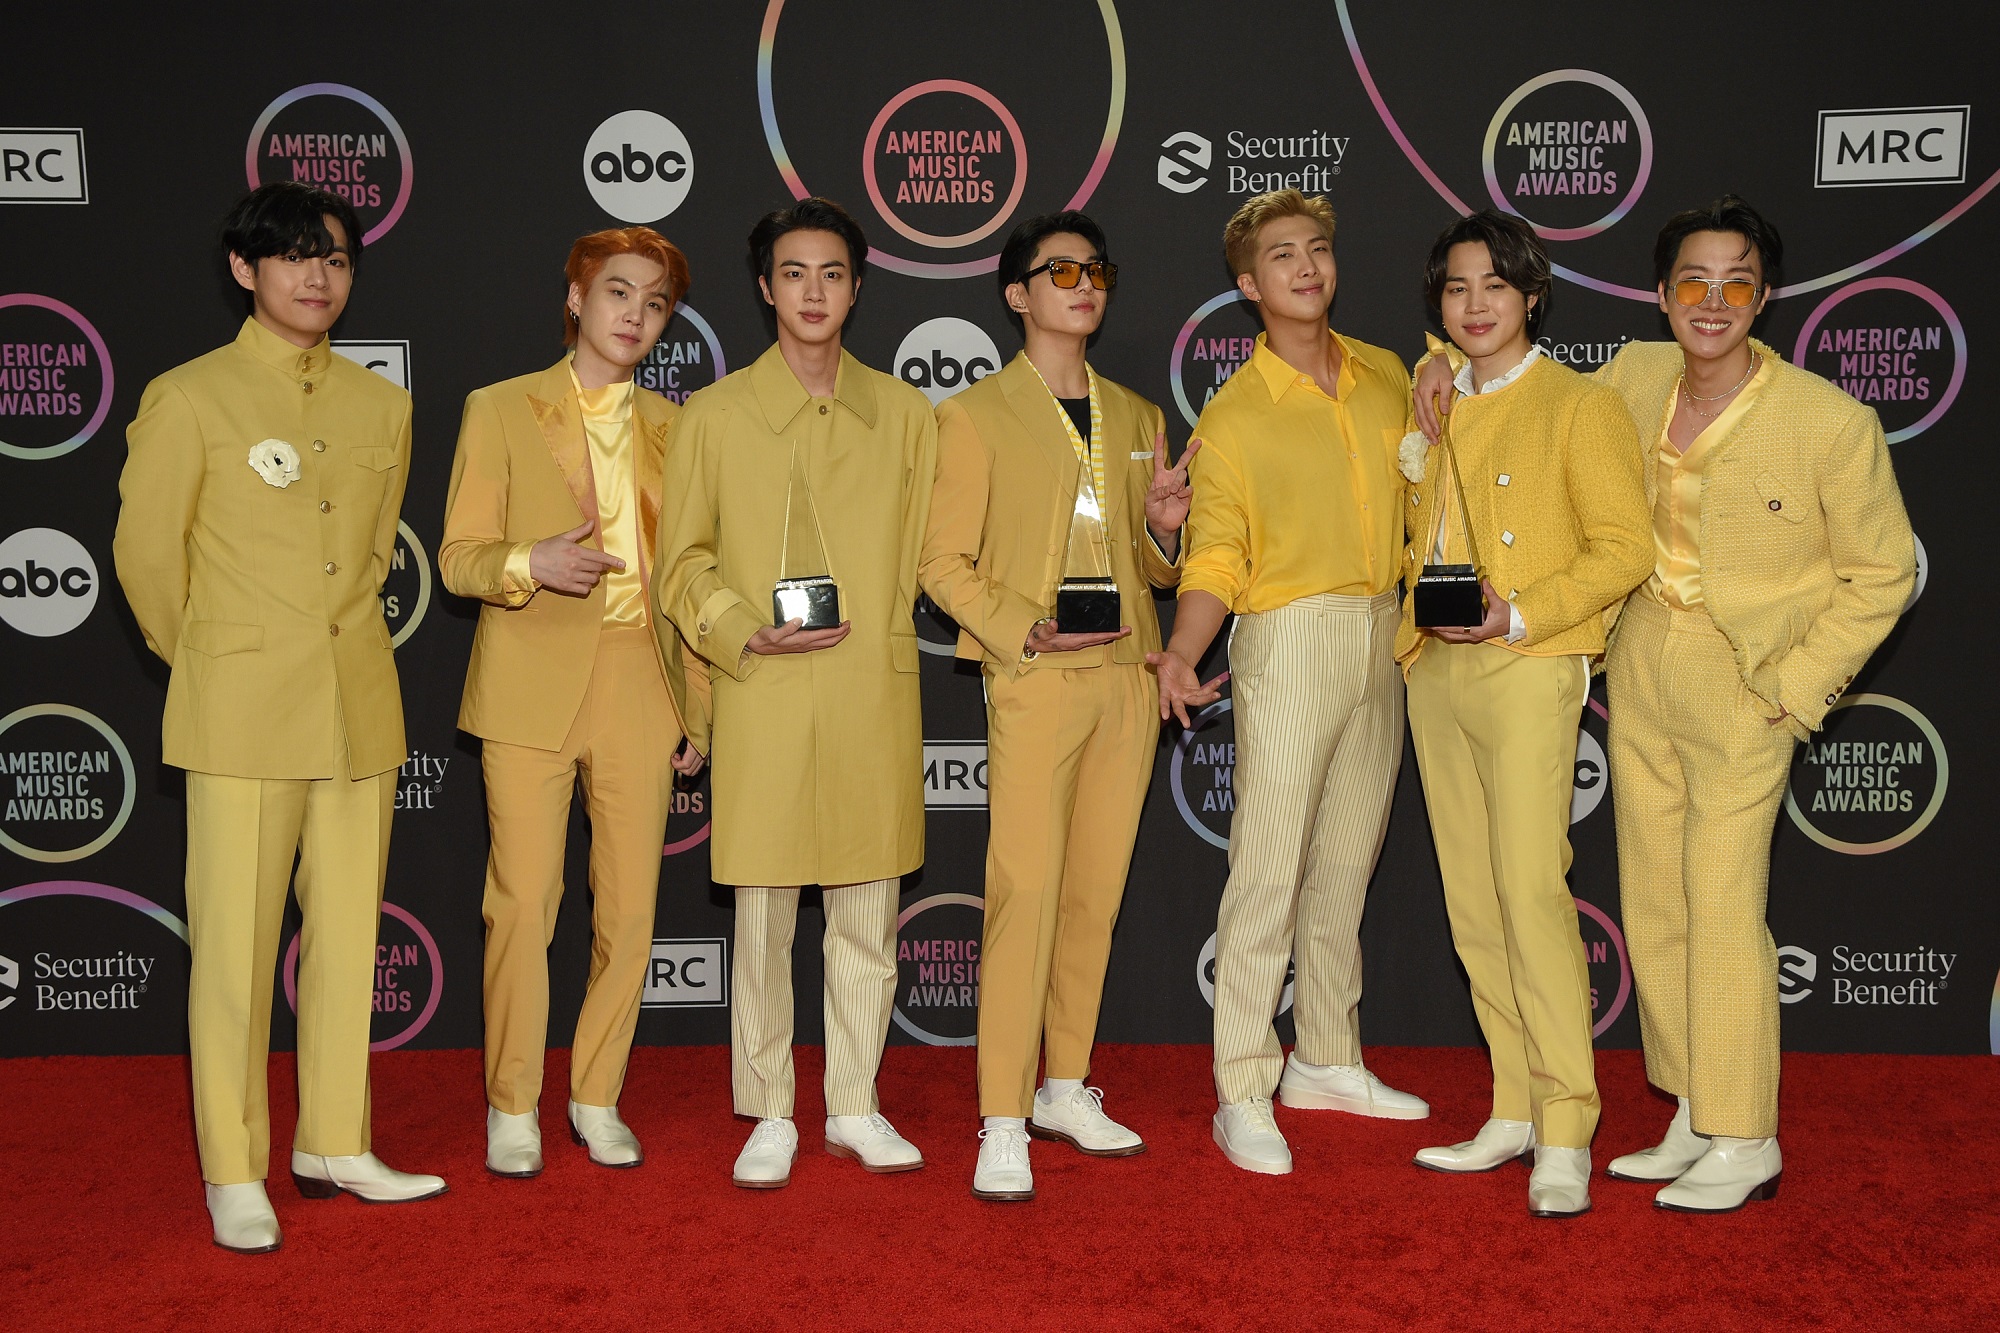 The members of BTS wear yellow outfits on the red carpet at the 2021 American Music Awards